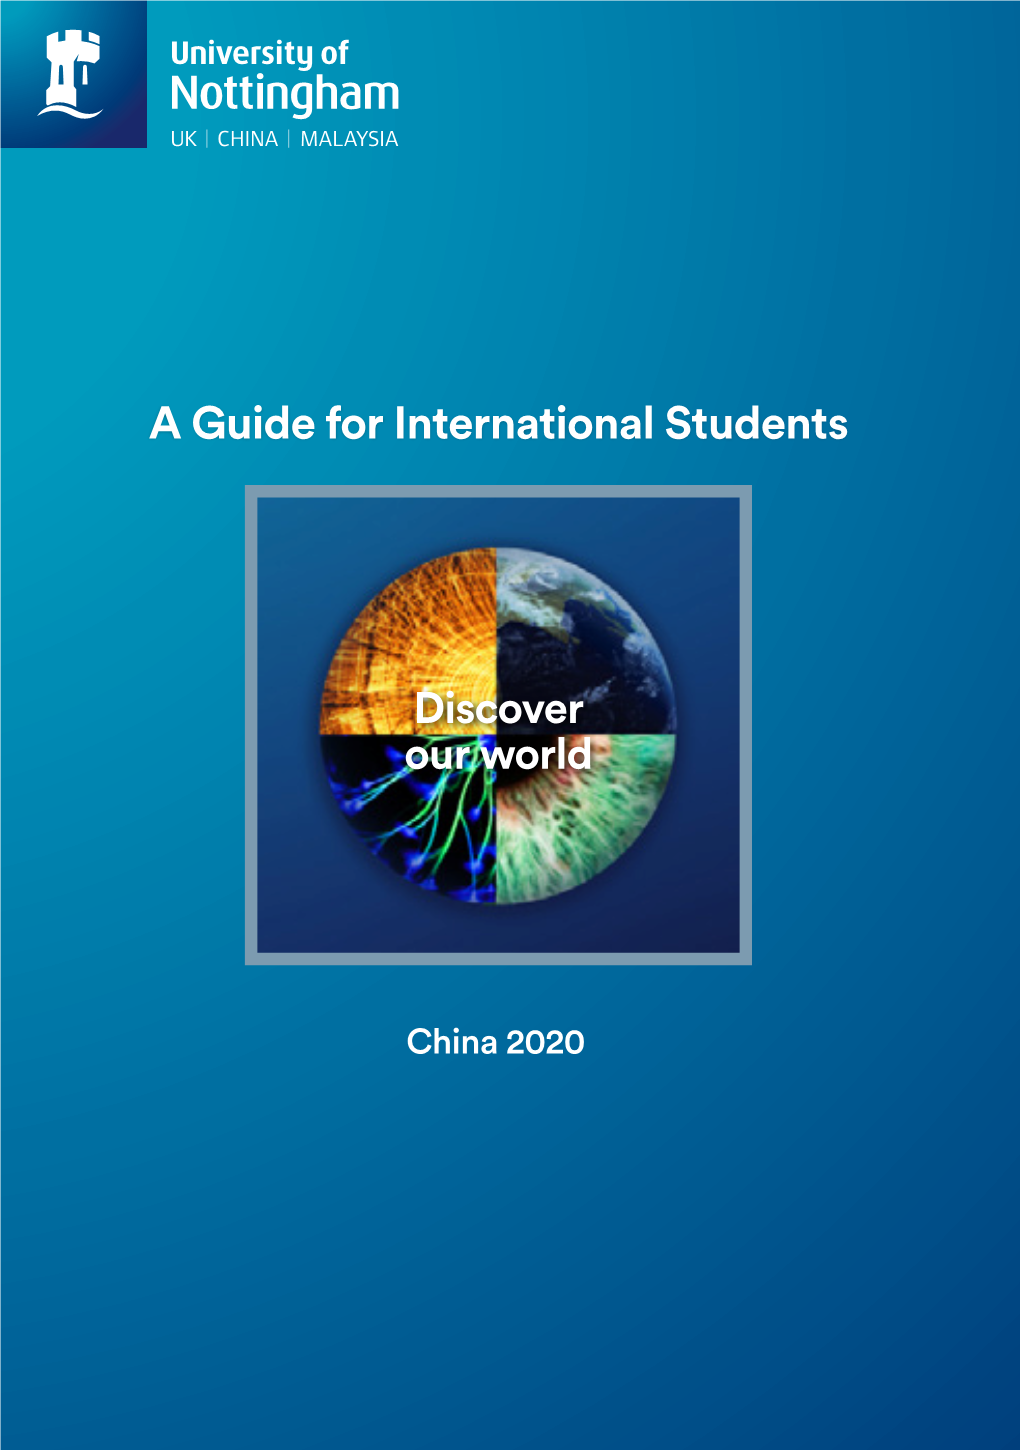 A Guide for International Students